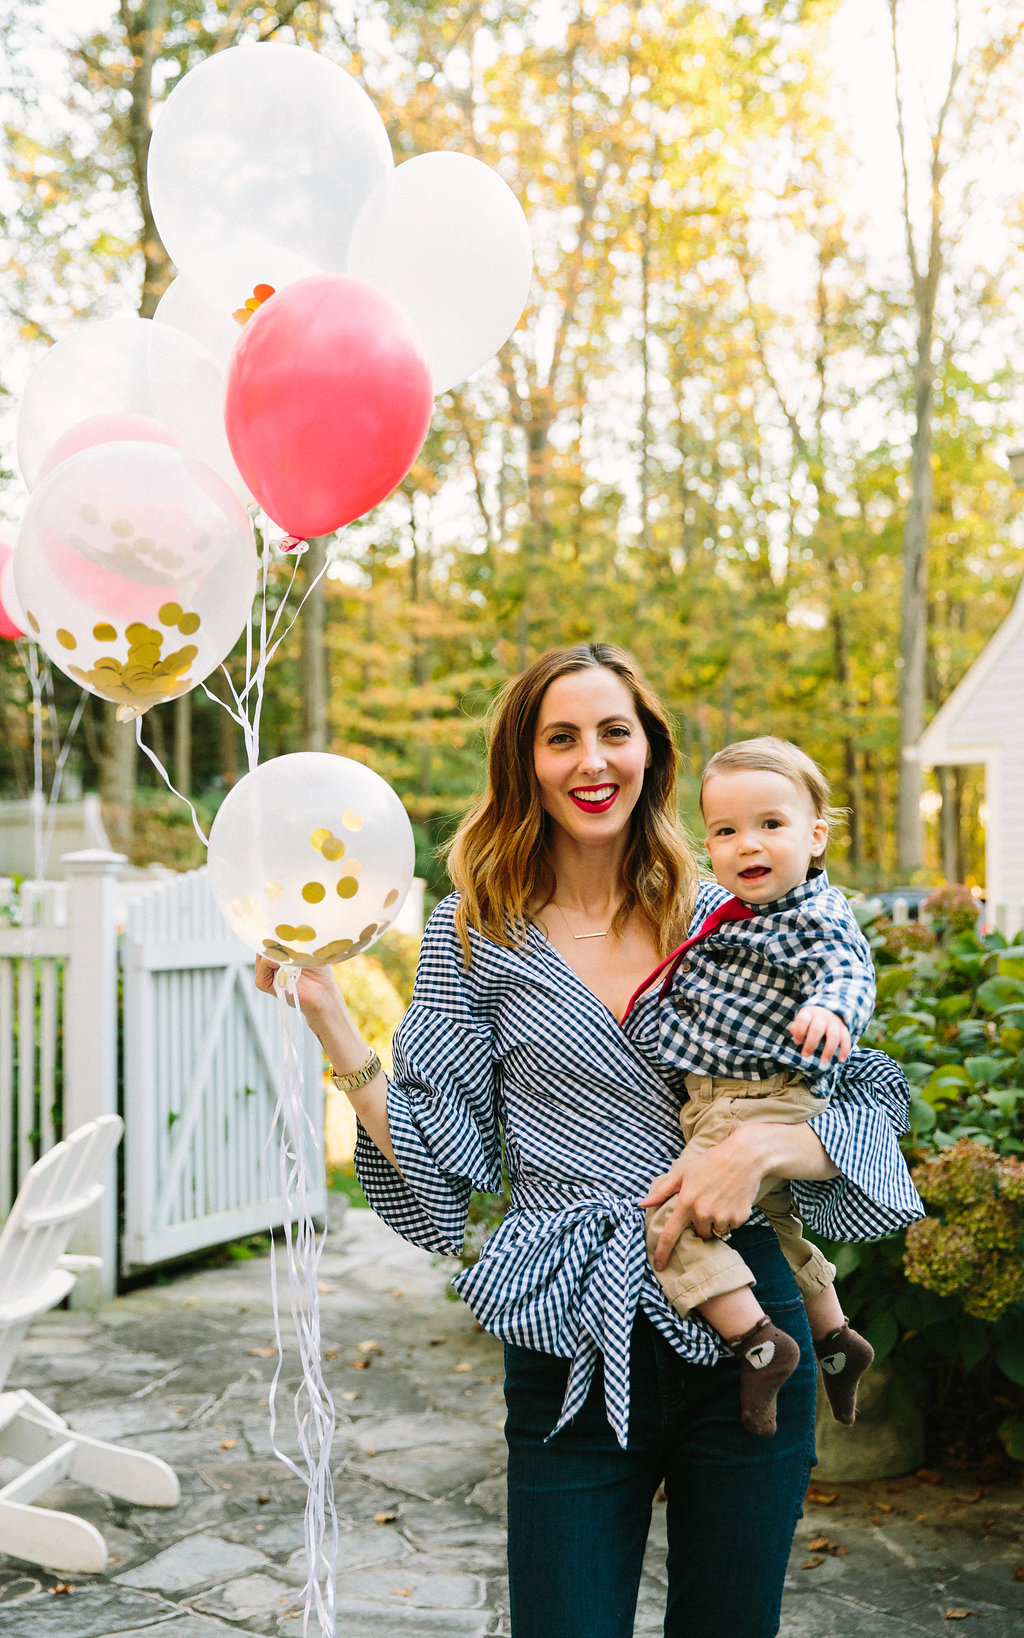 Eva Amurri Martino holds one year old son Major as they celebrate his first birthday with a teddy bear picnic themed party